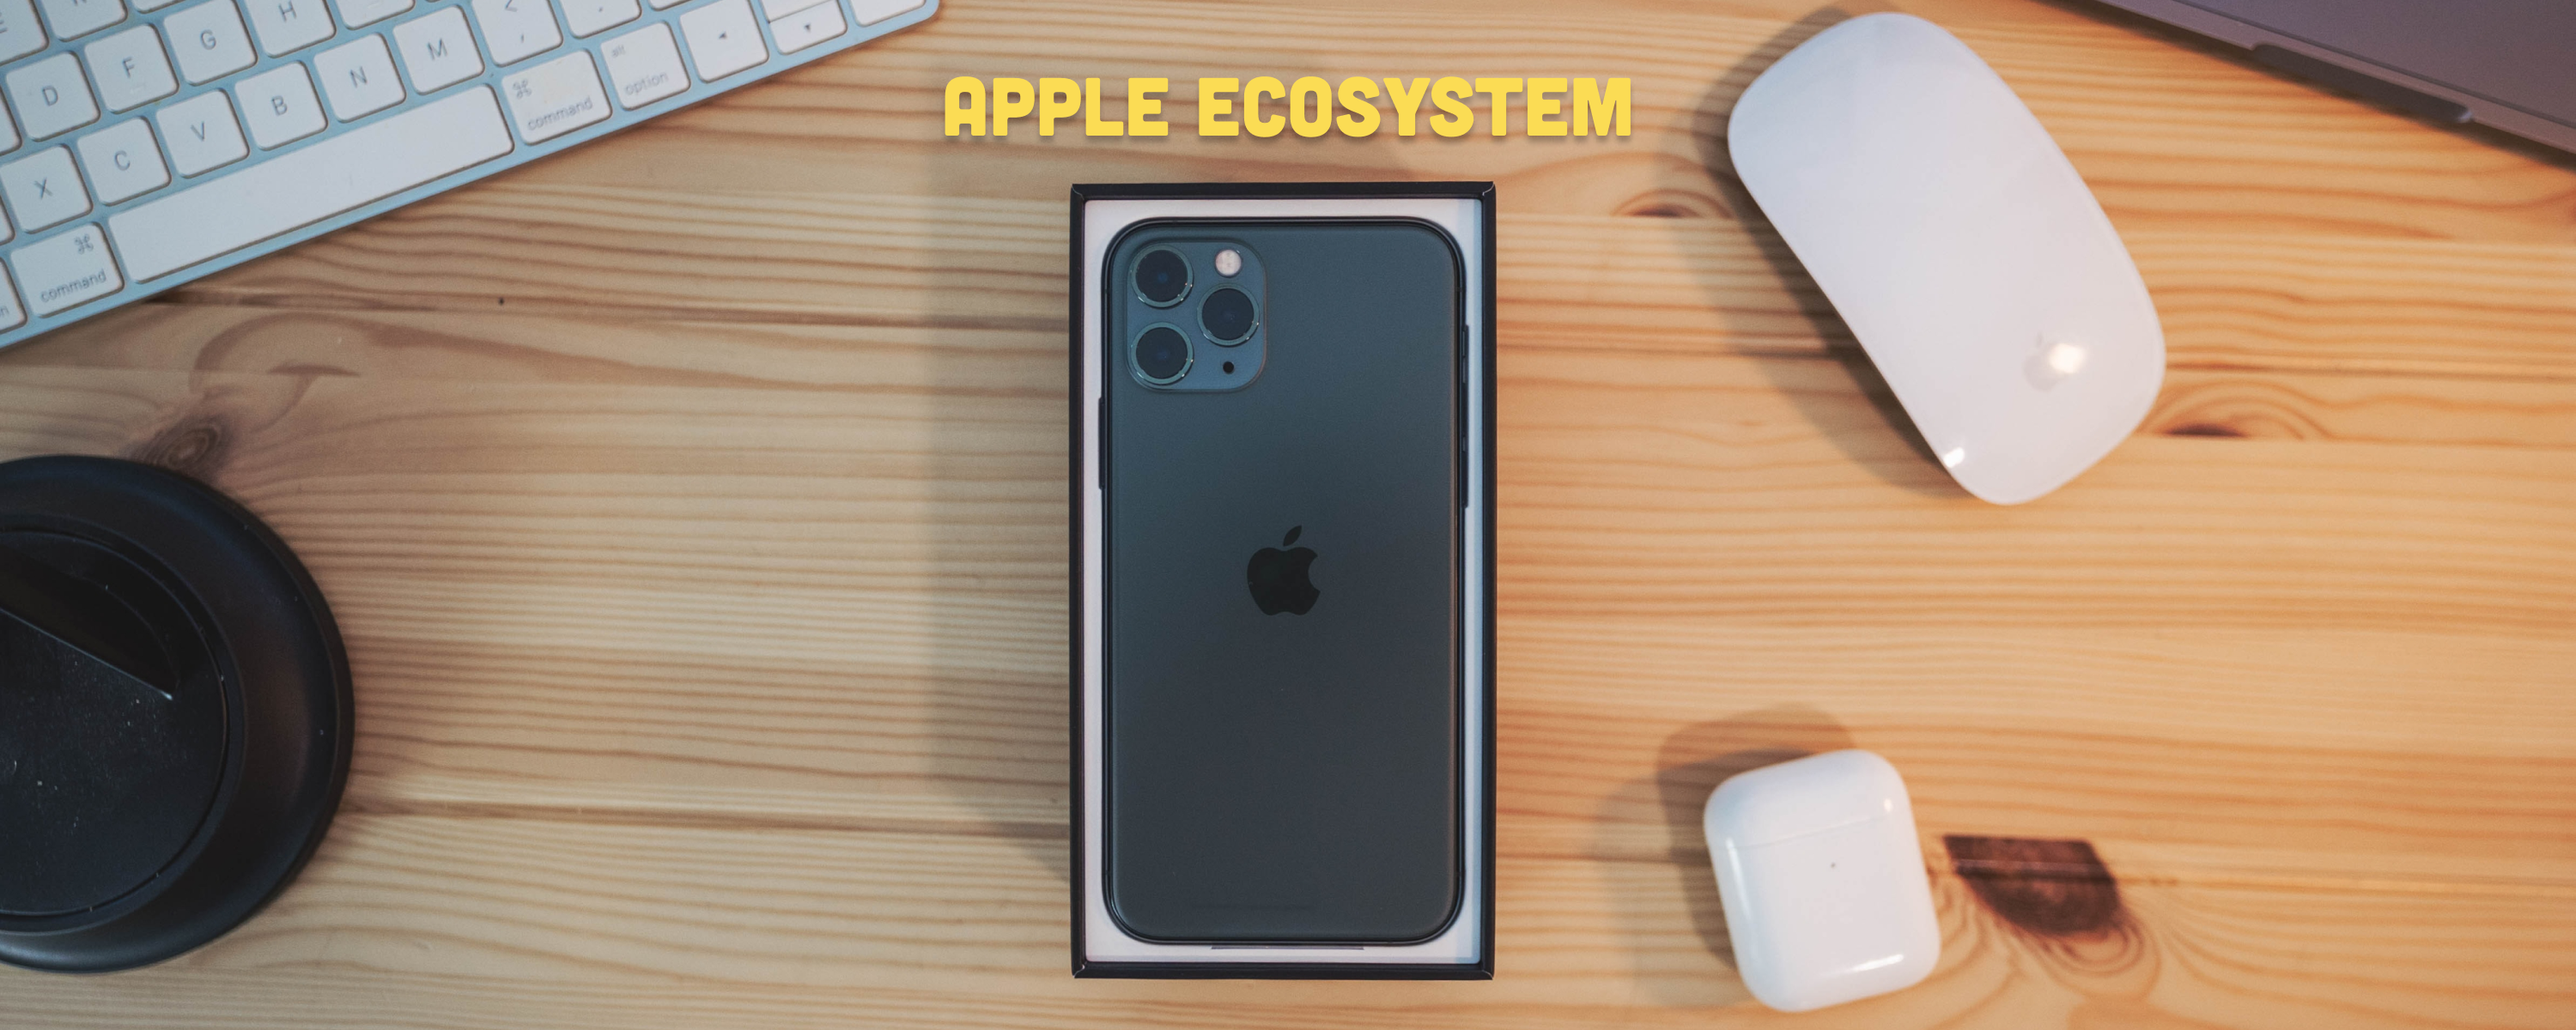 Apple Ecosystem: Everything You Need To Know